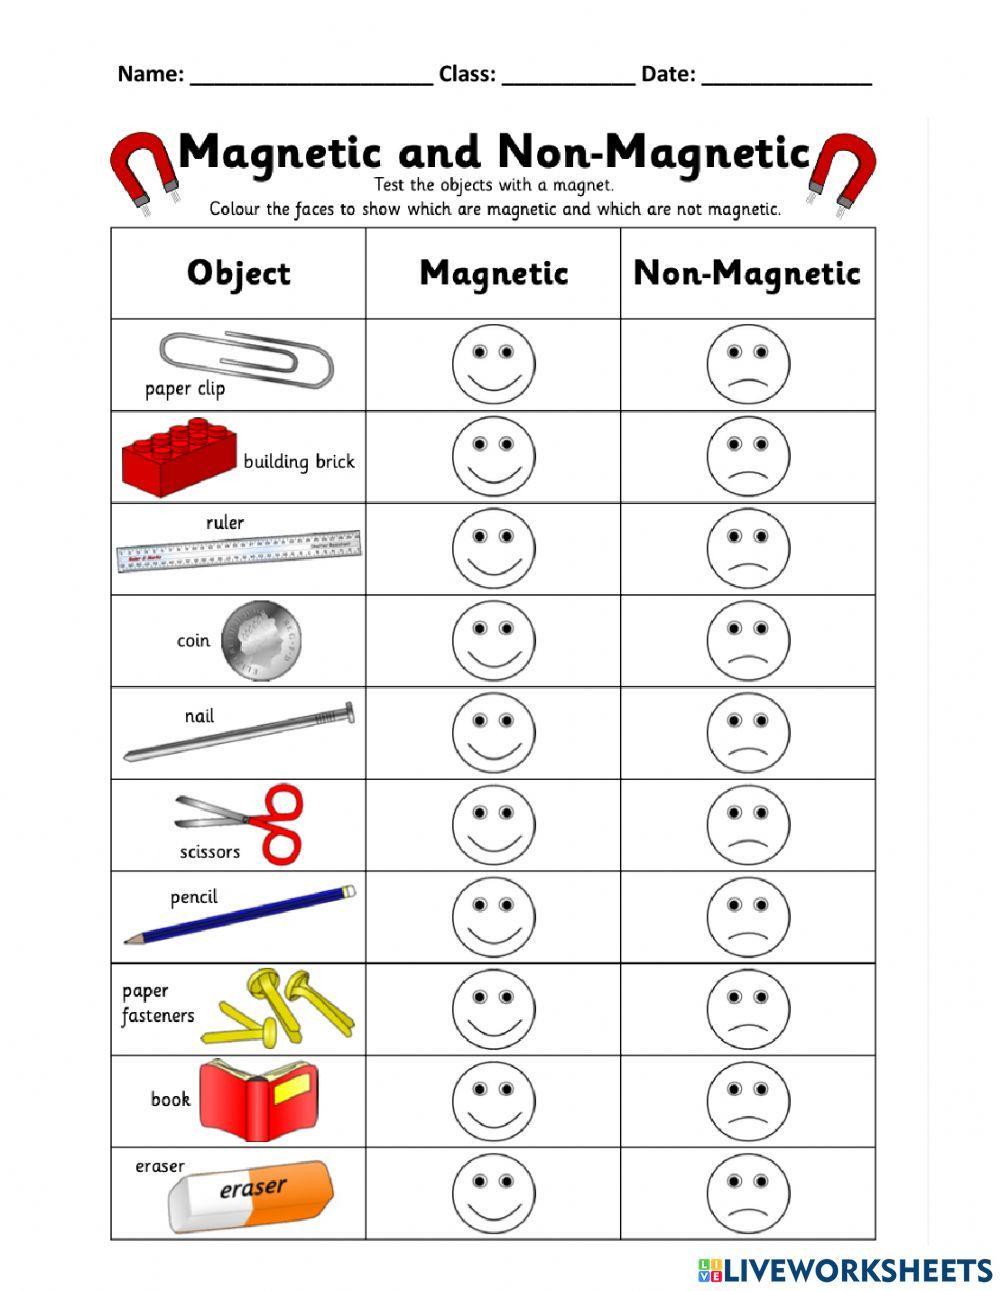 Magnetic or Non-Magnetic WS